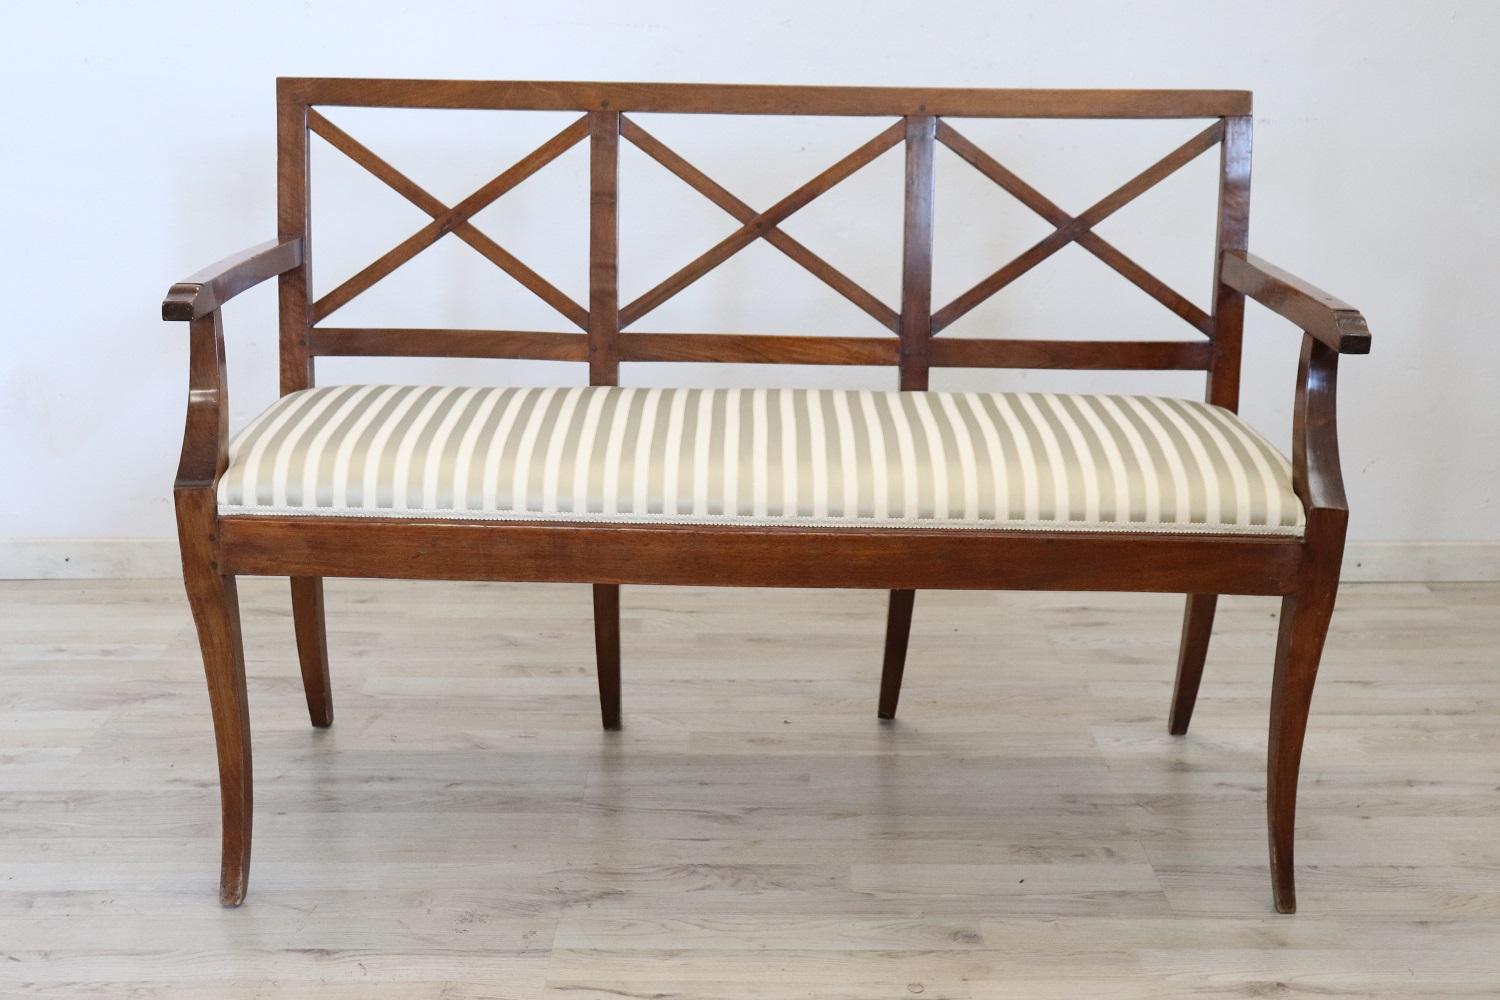 Antique bench 1790s in full directoire era. The bench is made of solid walnut wood. Refined seat in silk. Excellent antique good conditions of the wood, some signs of wear in the silk. It is an adorable bench due to its small size and is perfect in